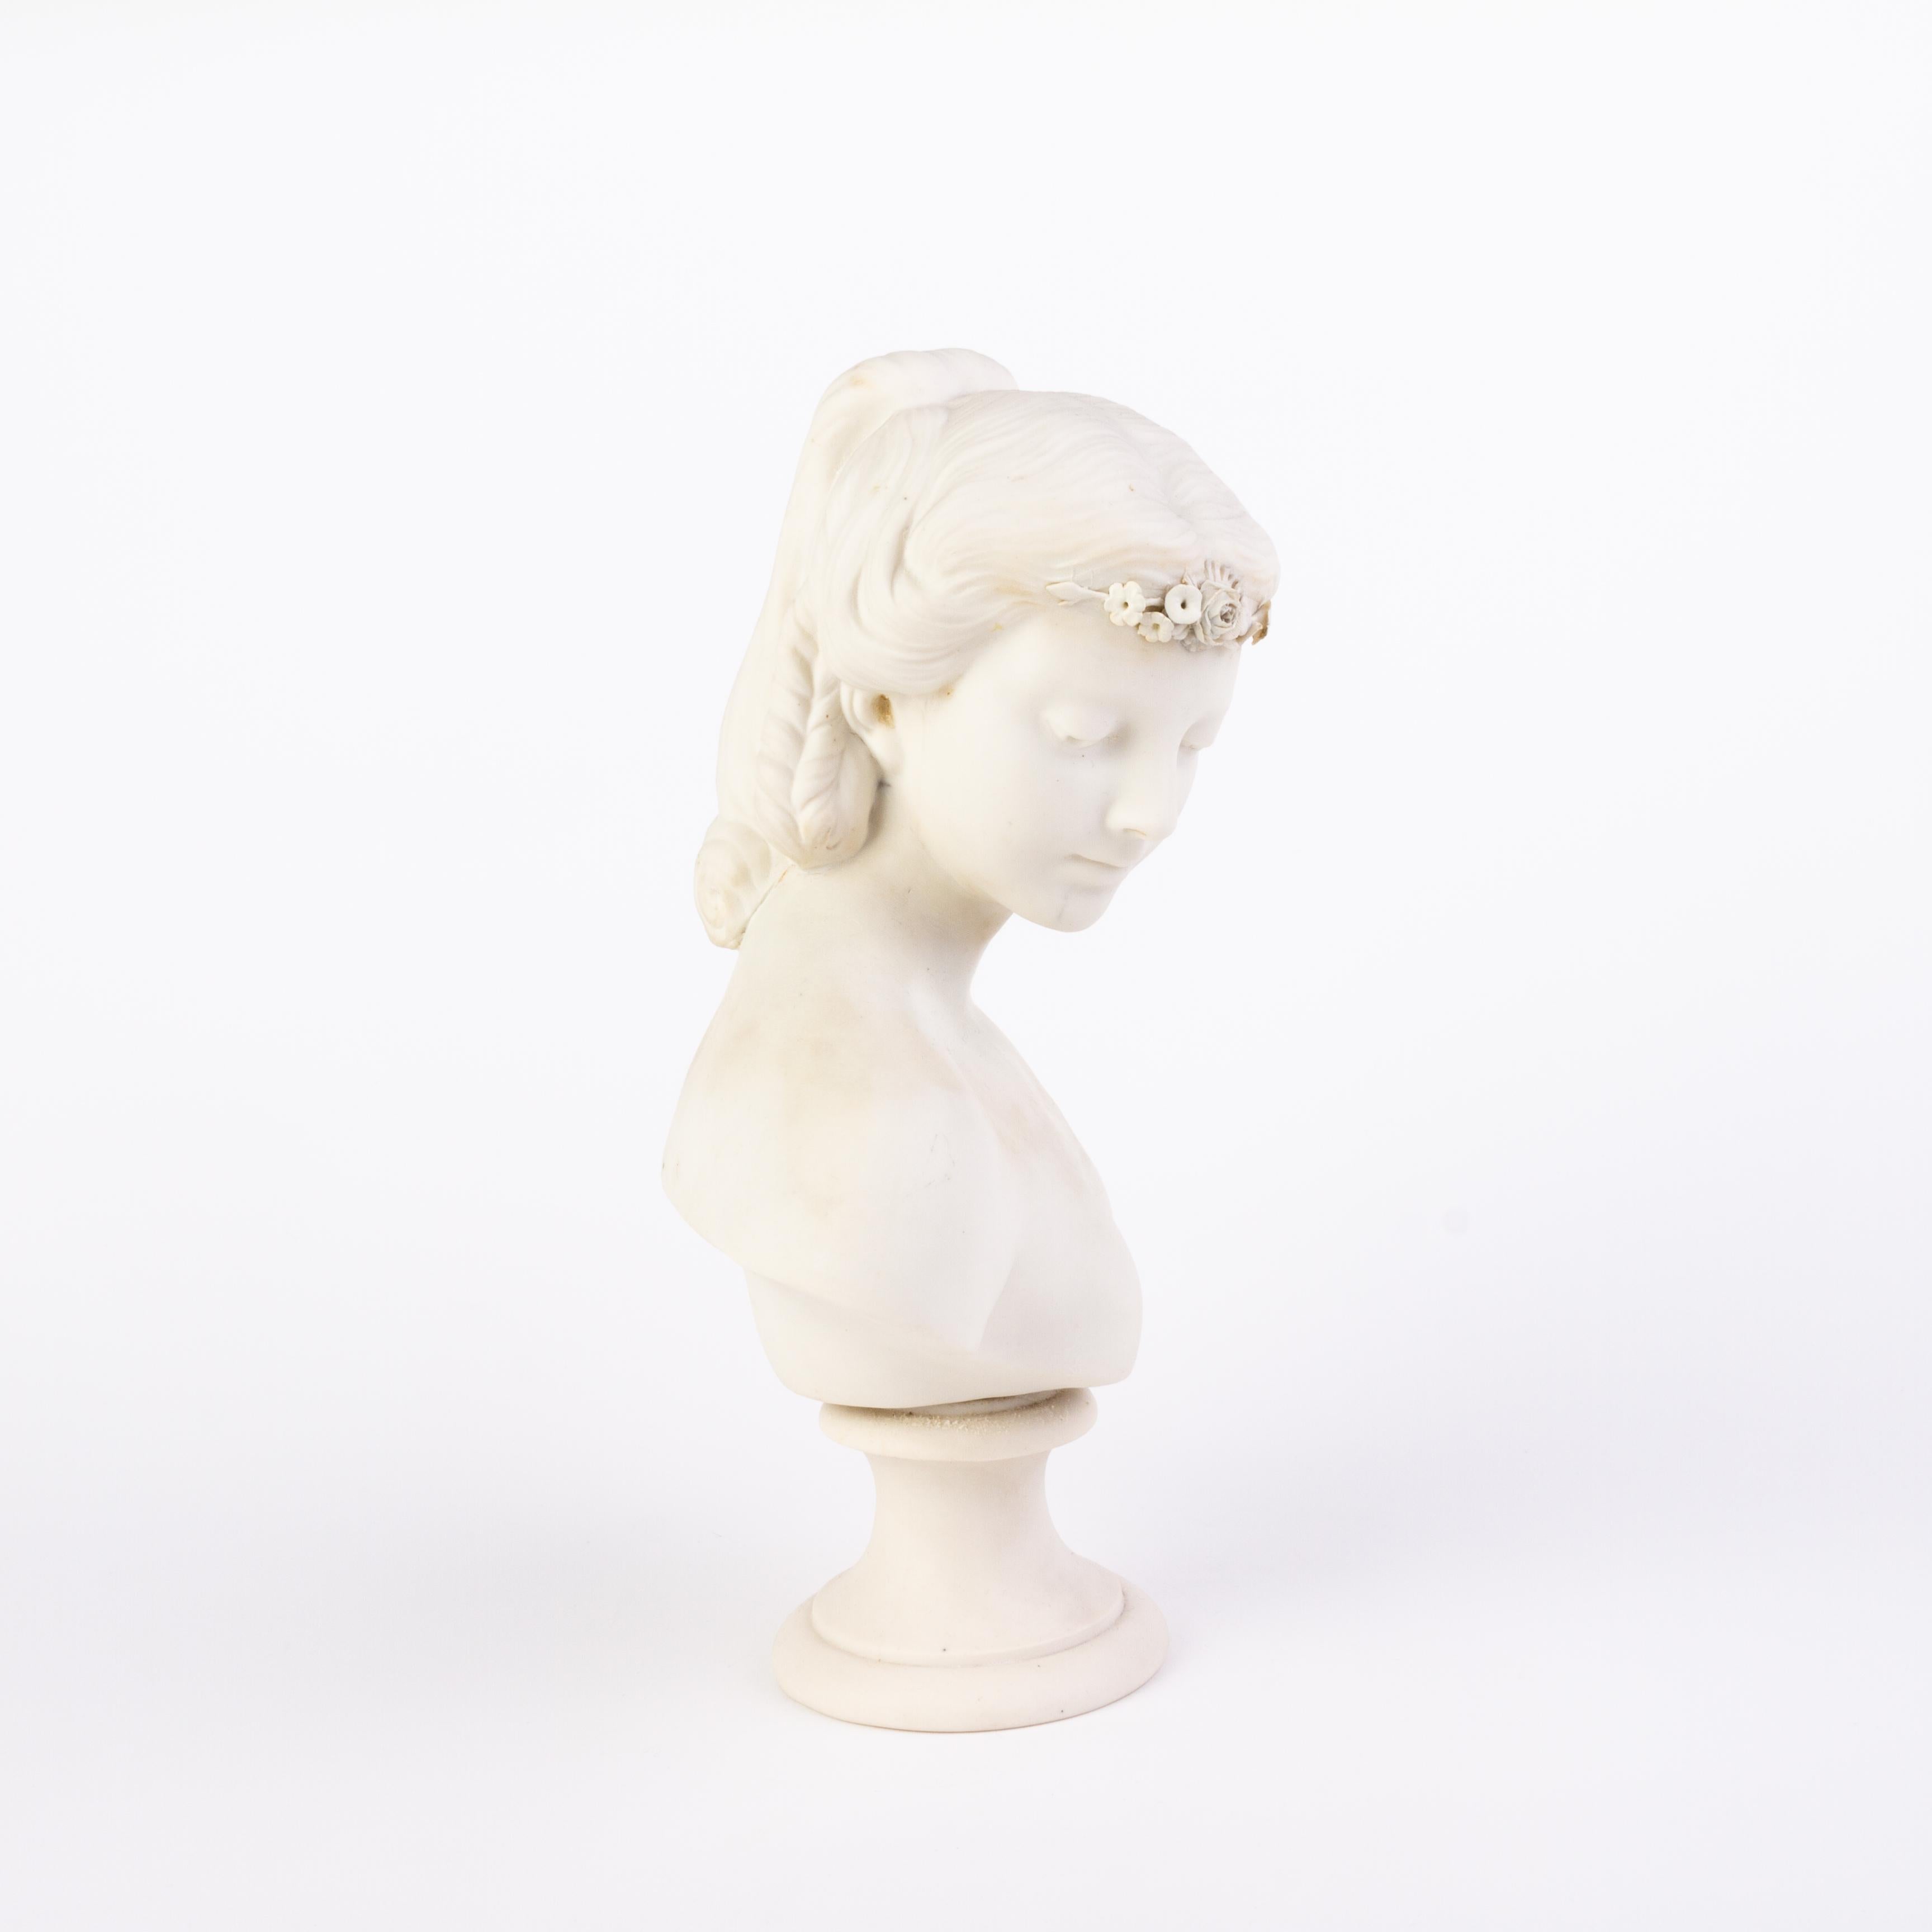 English Victorian Copeland Parian Ware Bust of Clythie 19th Century
Good condition
From a private collection.
Free international shipping.